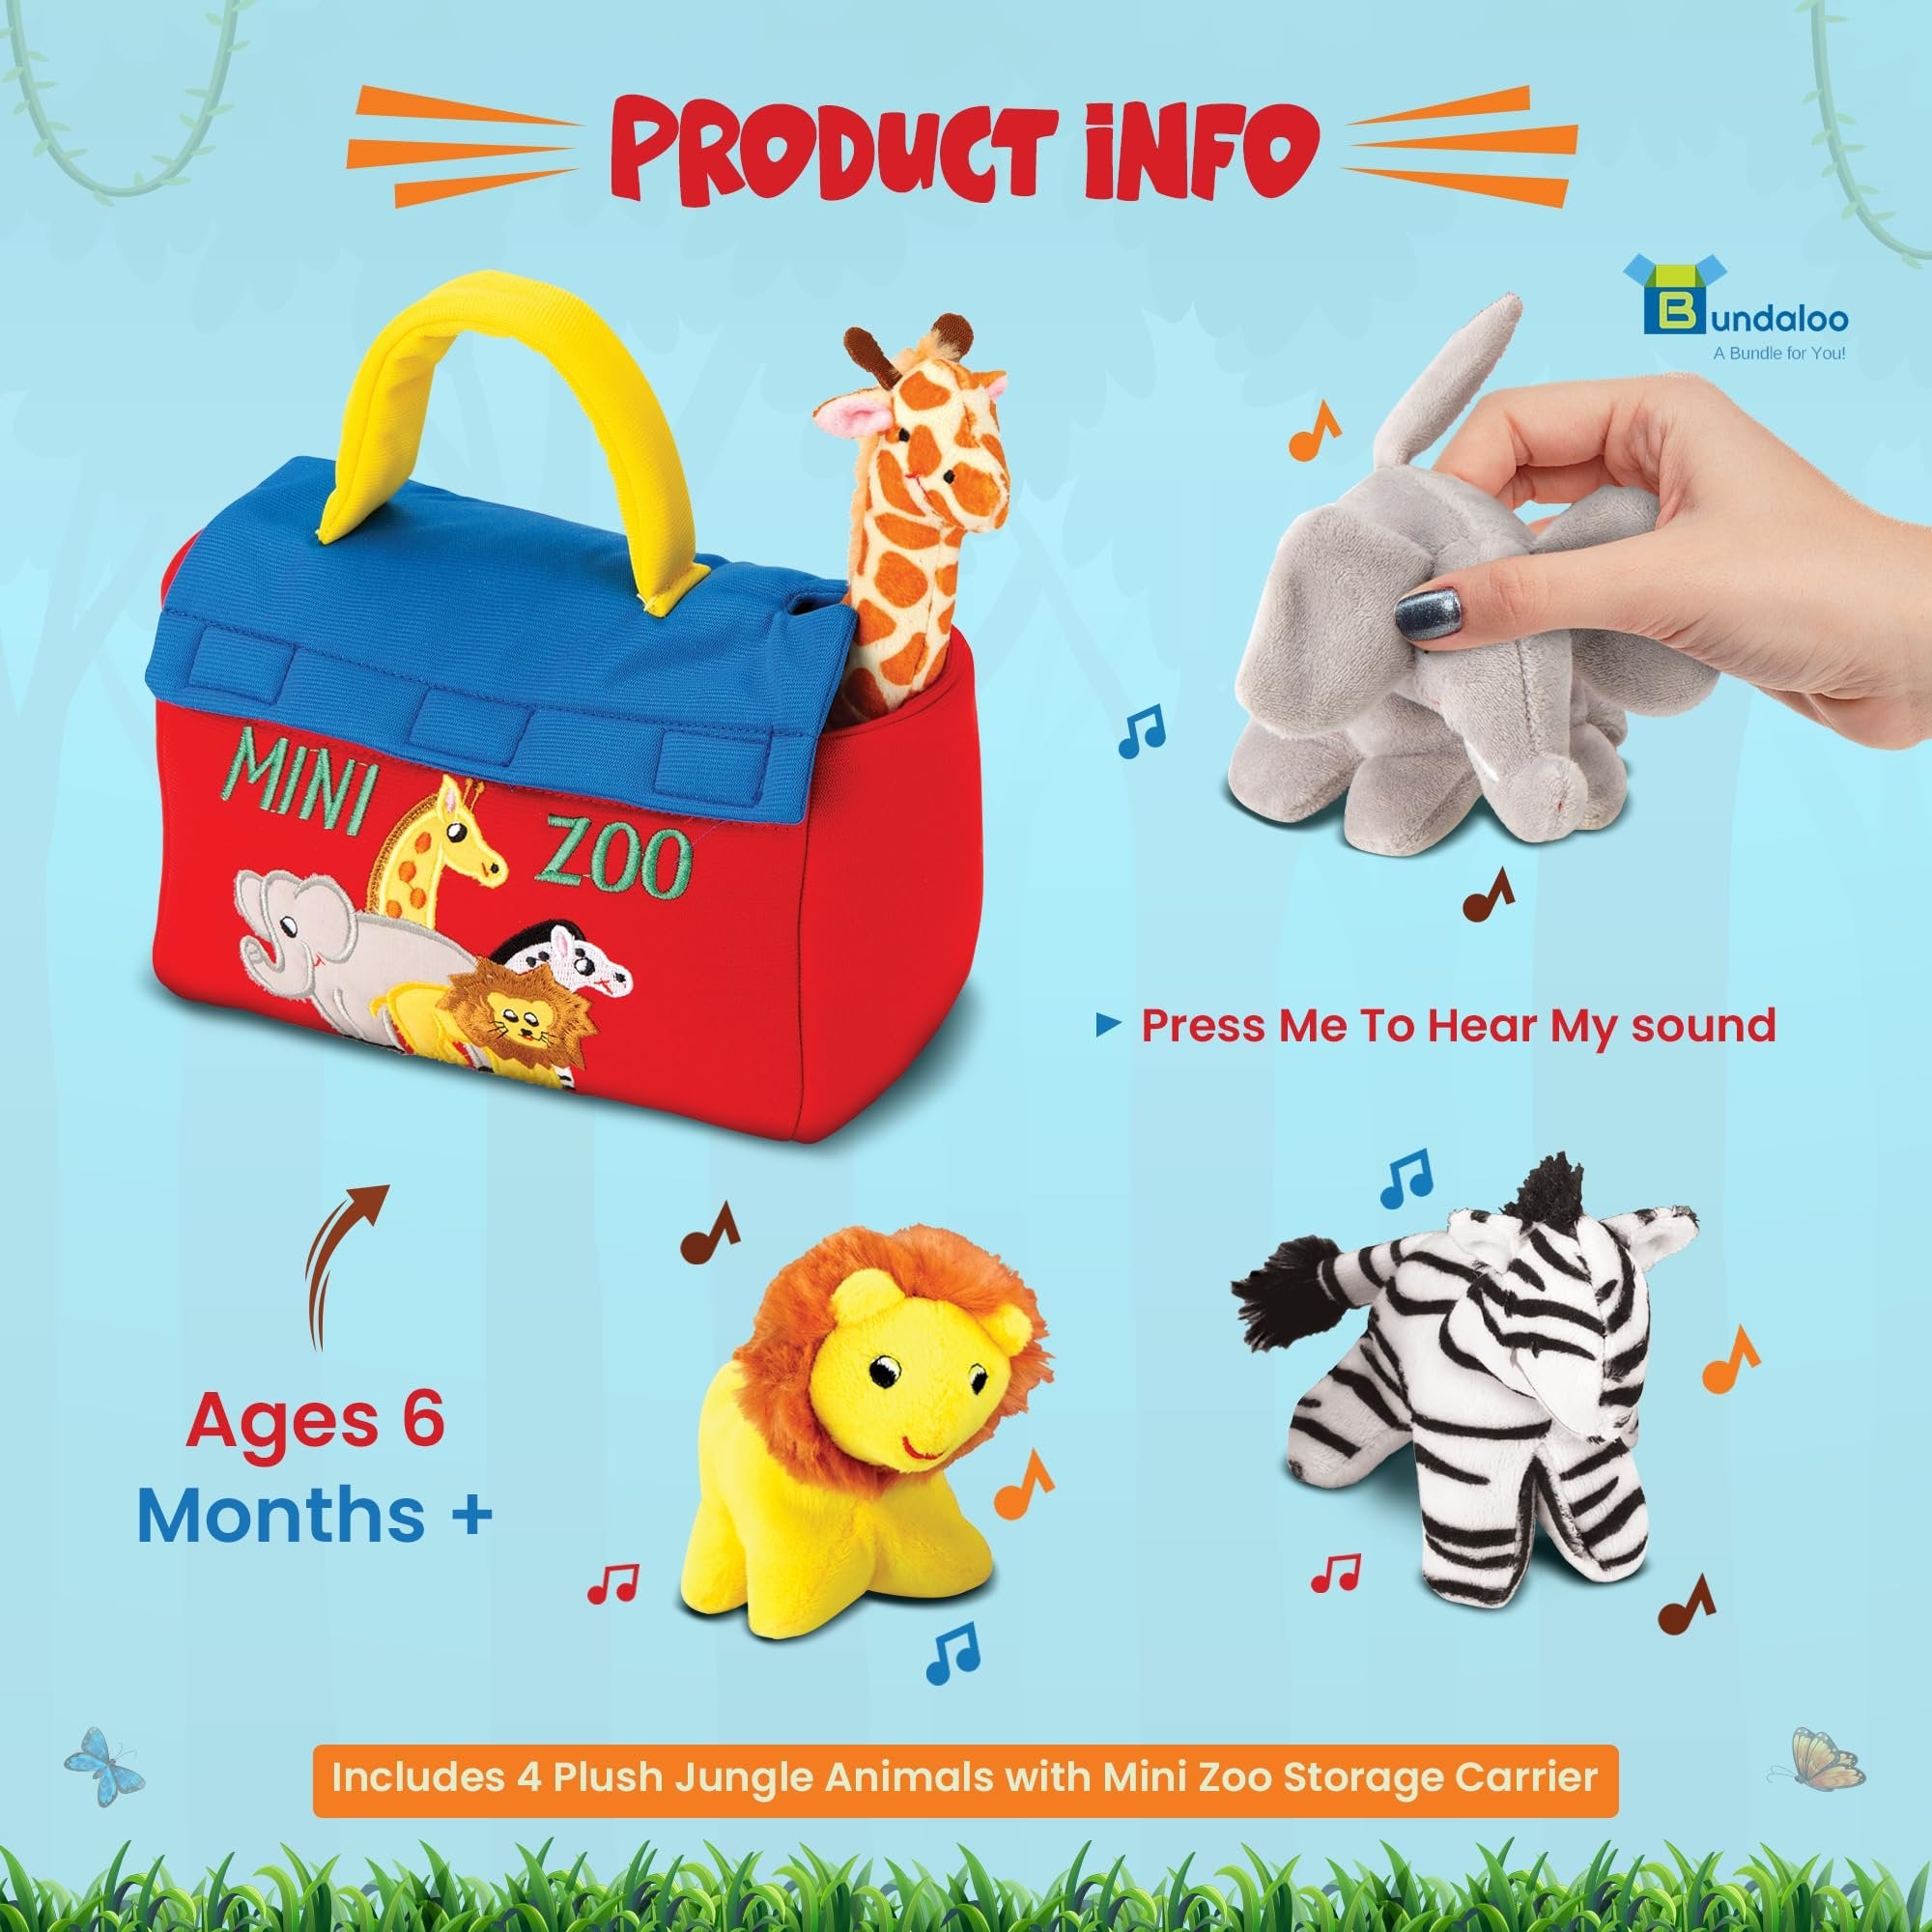 Bundaloo Plush Mini Zoo Playset - Giraffe, Elephant, Lion, Zebra - Interactive Animals, Carrier with Velcro Closure, Natural Sound Effects for Babies and Toddlers